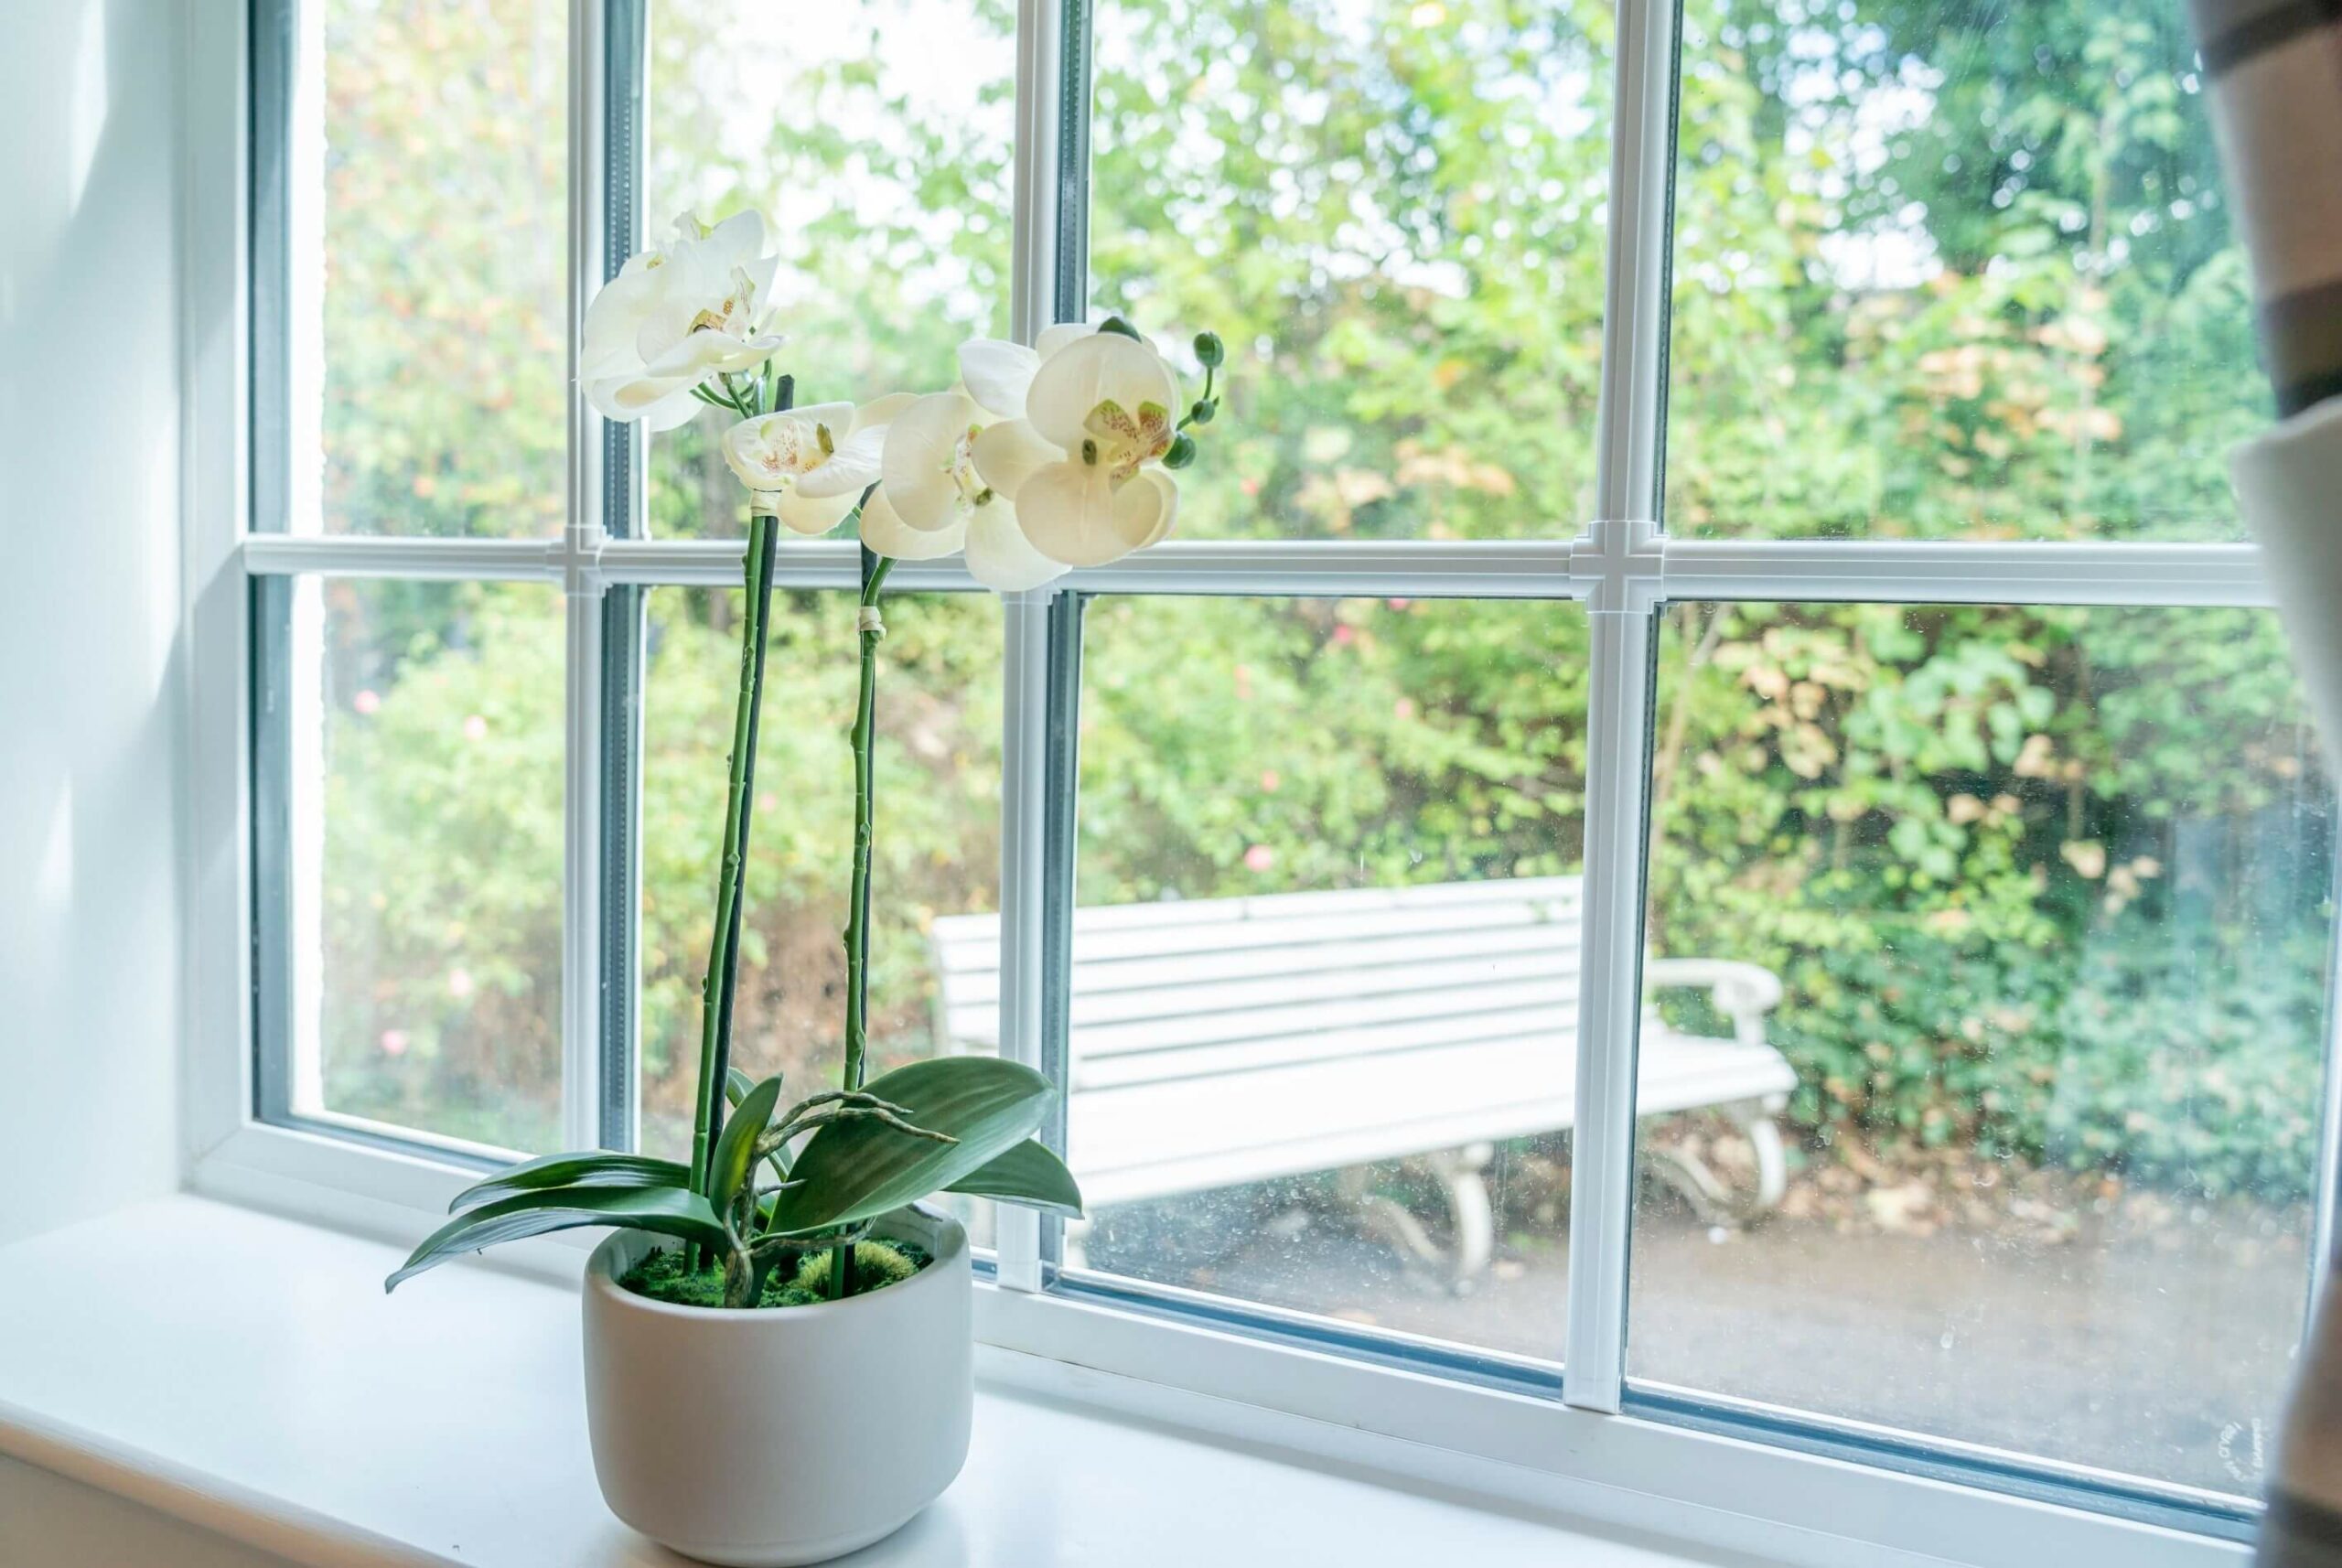 Orchids bloom in a bright window